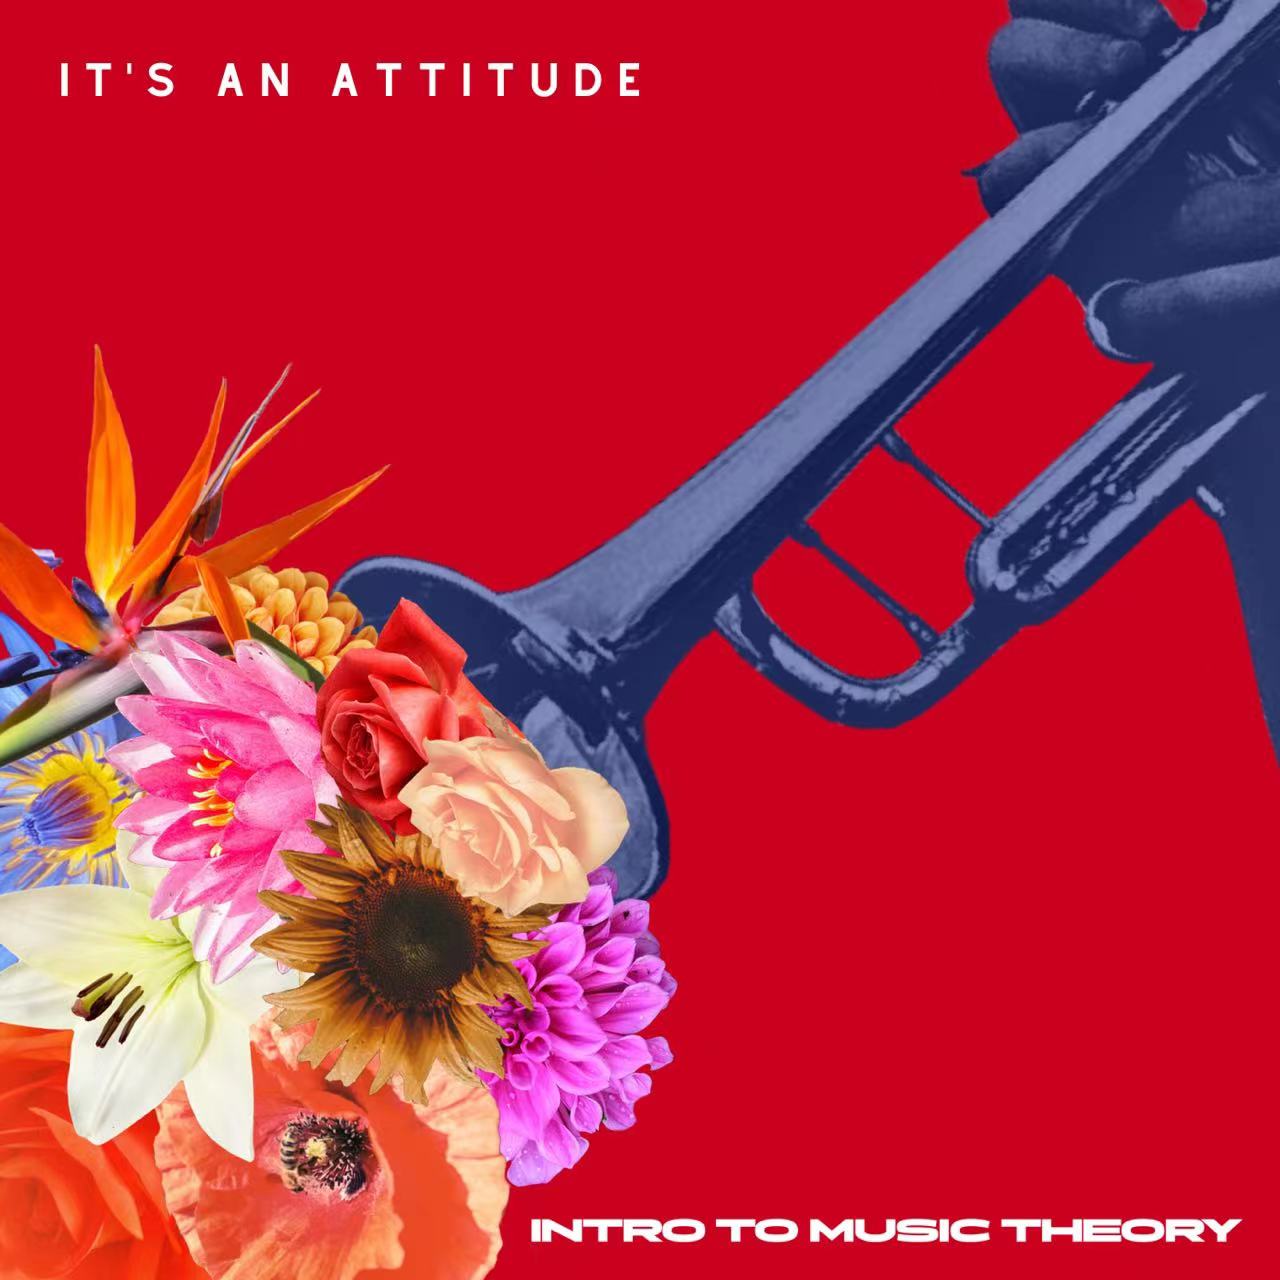 “It’s An Attitude” by Intro to Music Theory